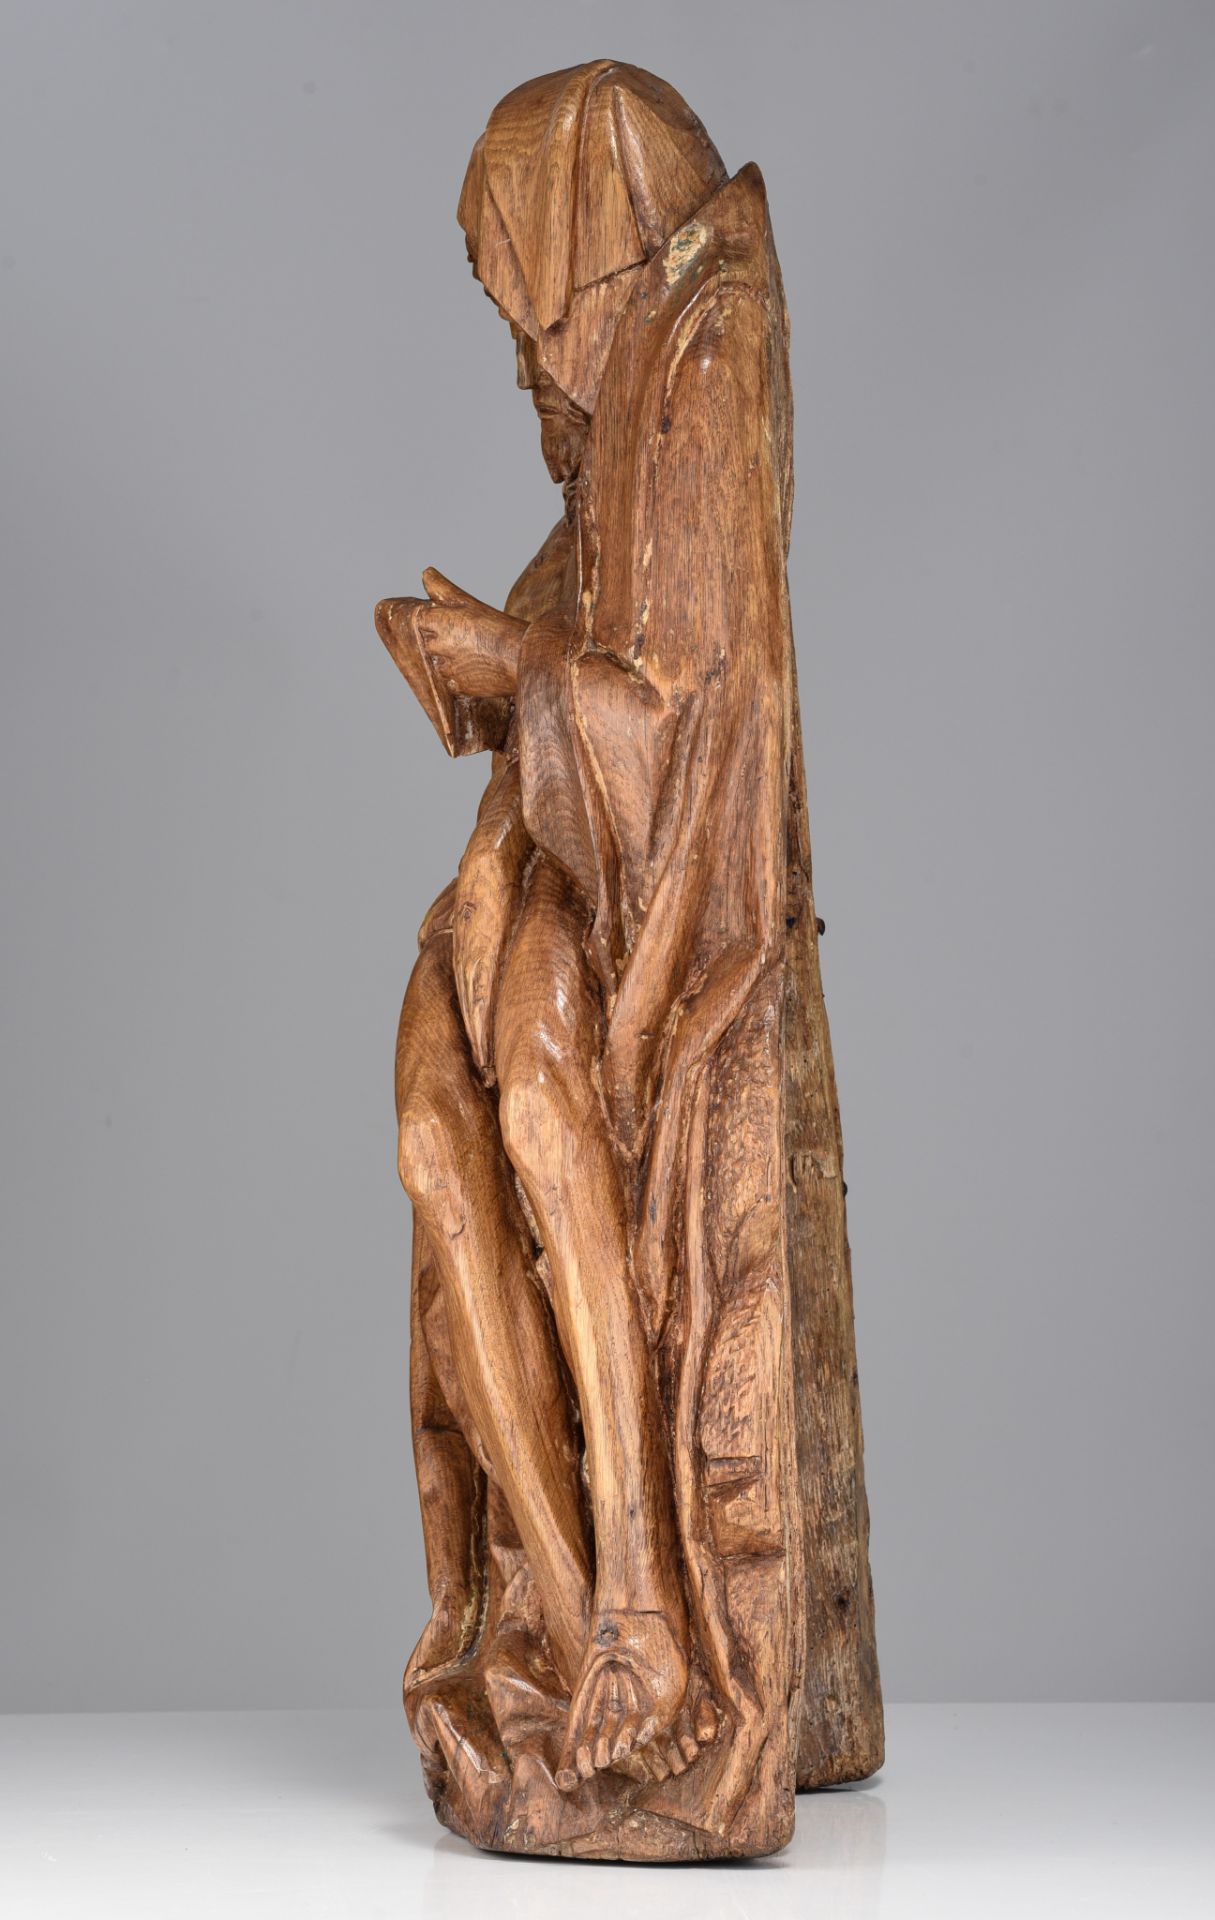 A 16thC oak sculpture of the Pieta, probably the Southern Netherlands, H 97 cm - Image 3 of 6